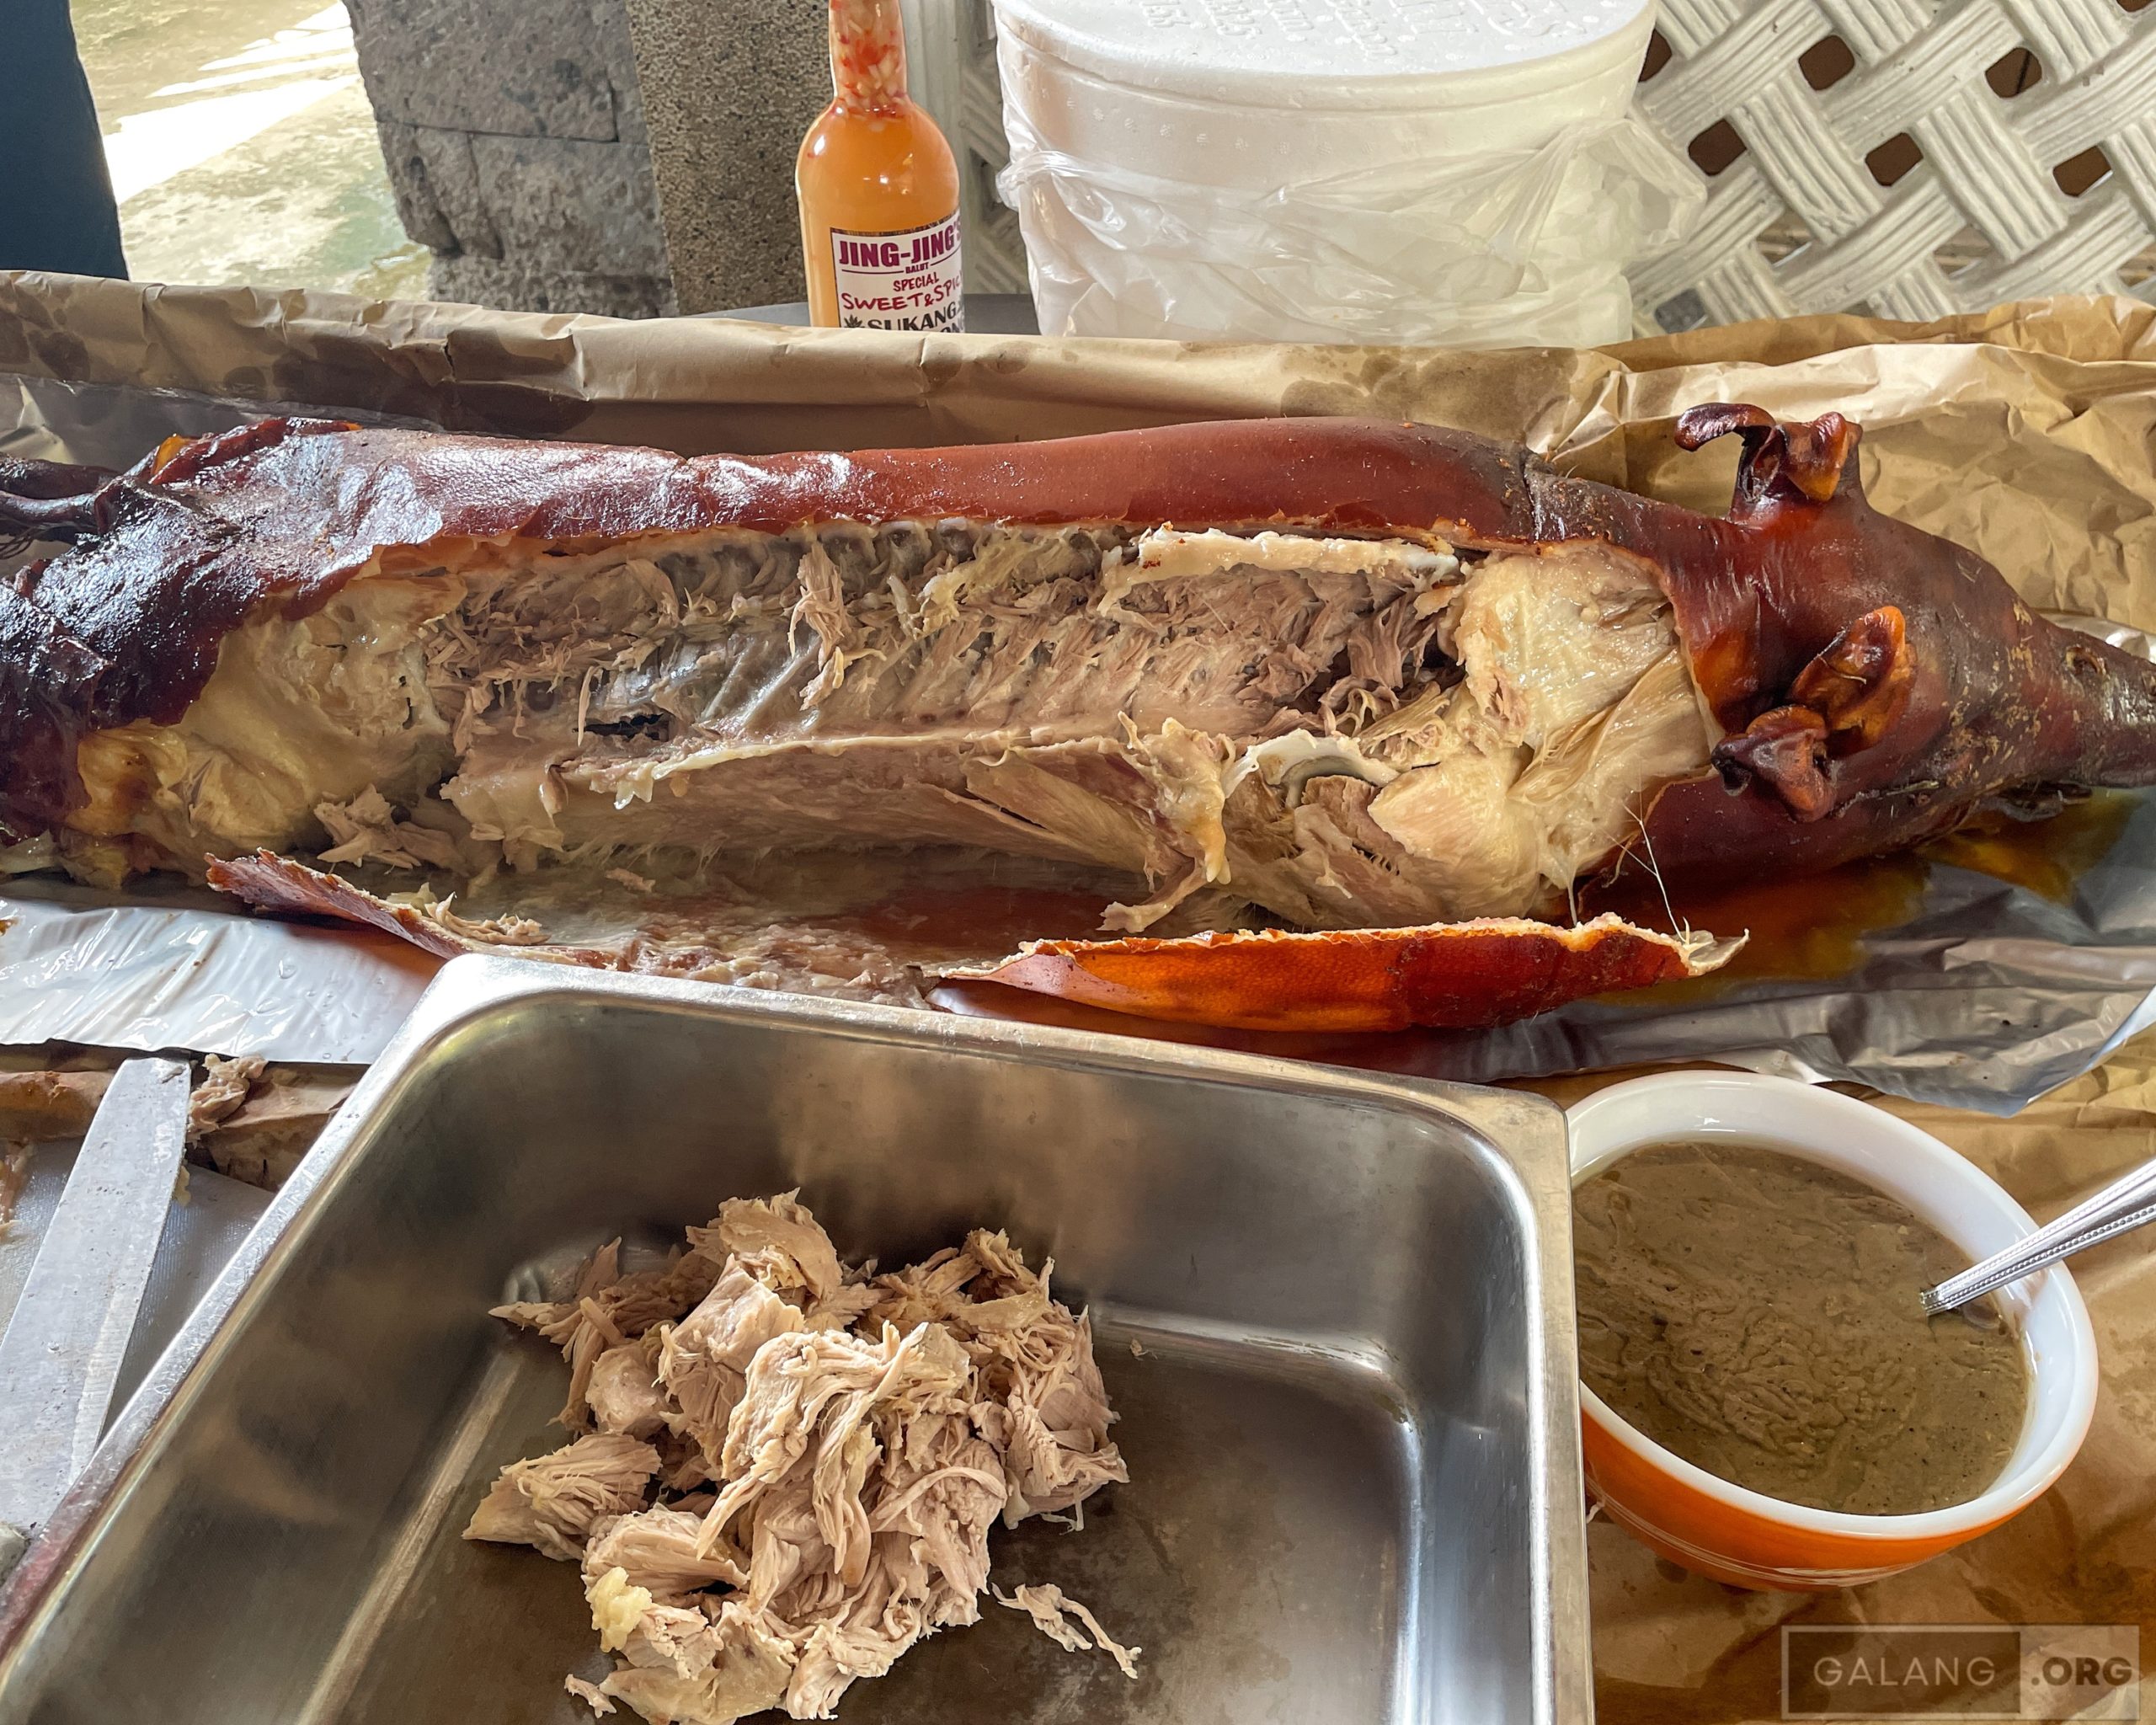 I didn’t catch the lechon uncarved, so here’s what I got for the camera.